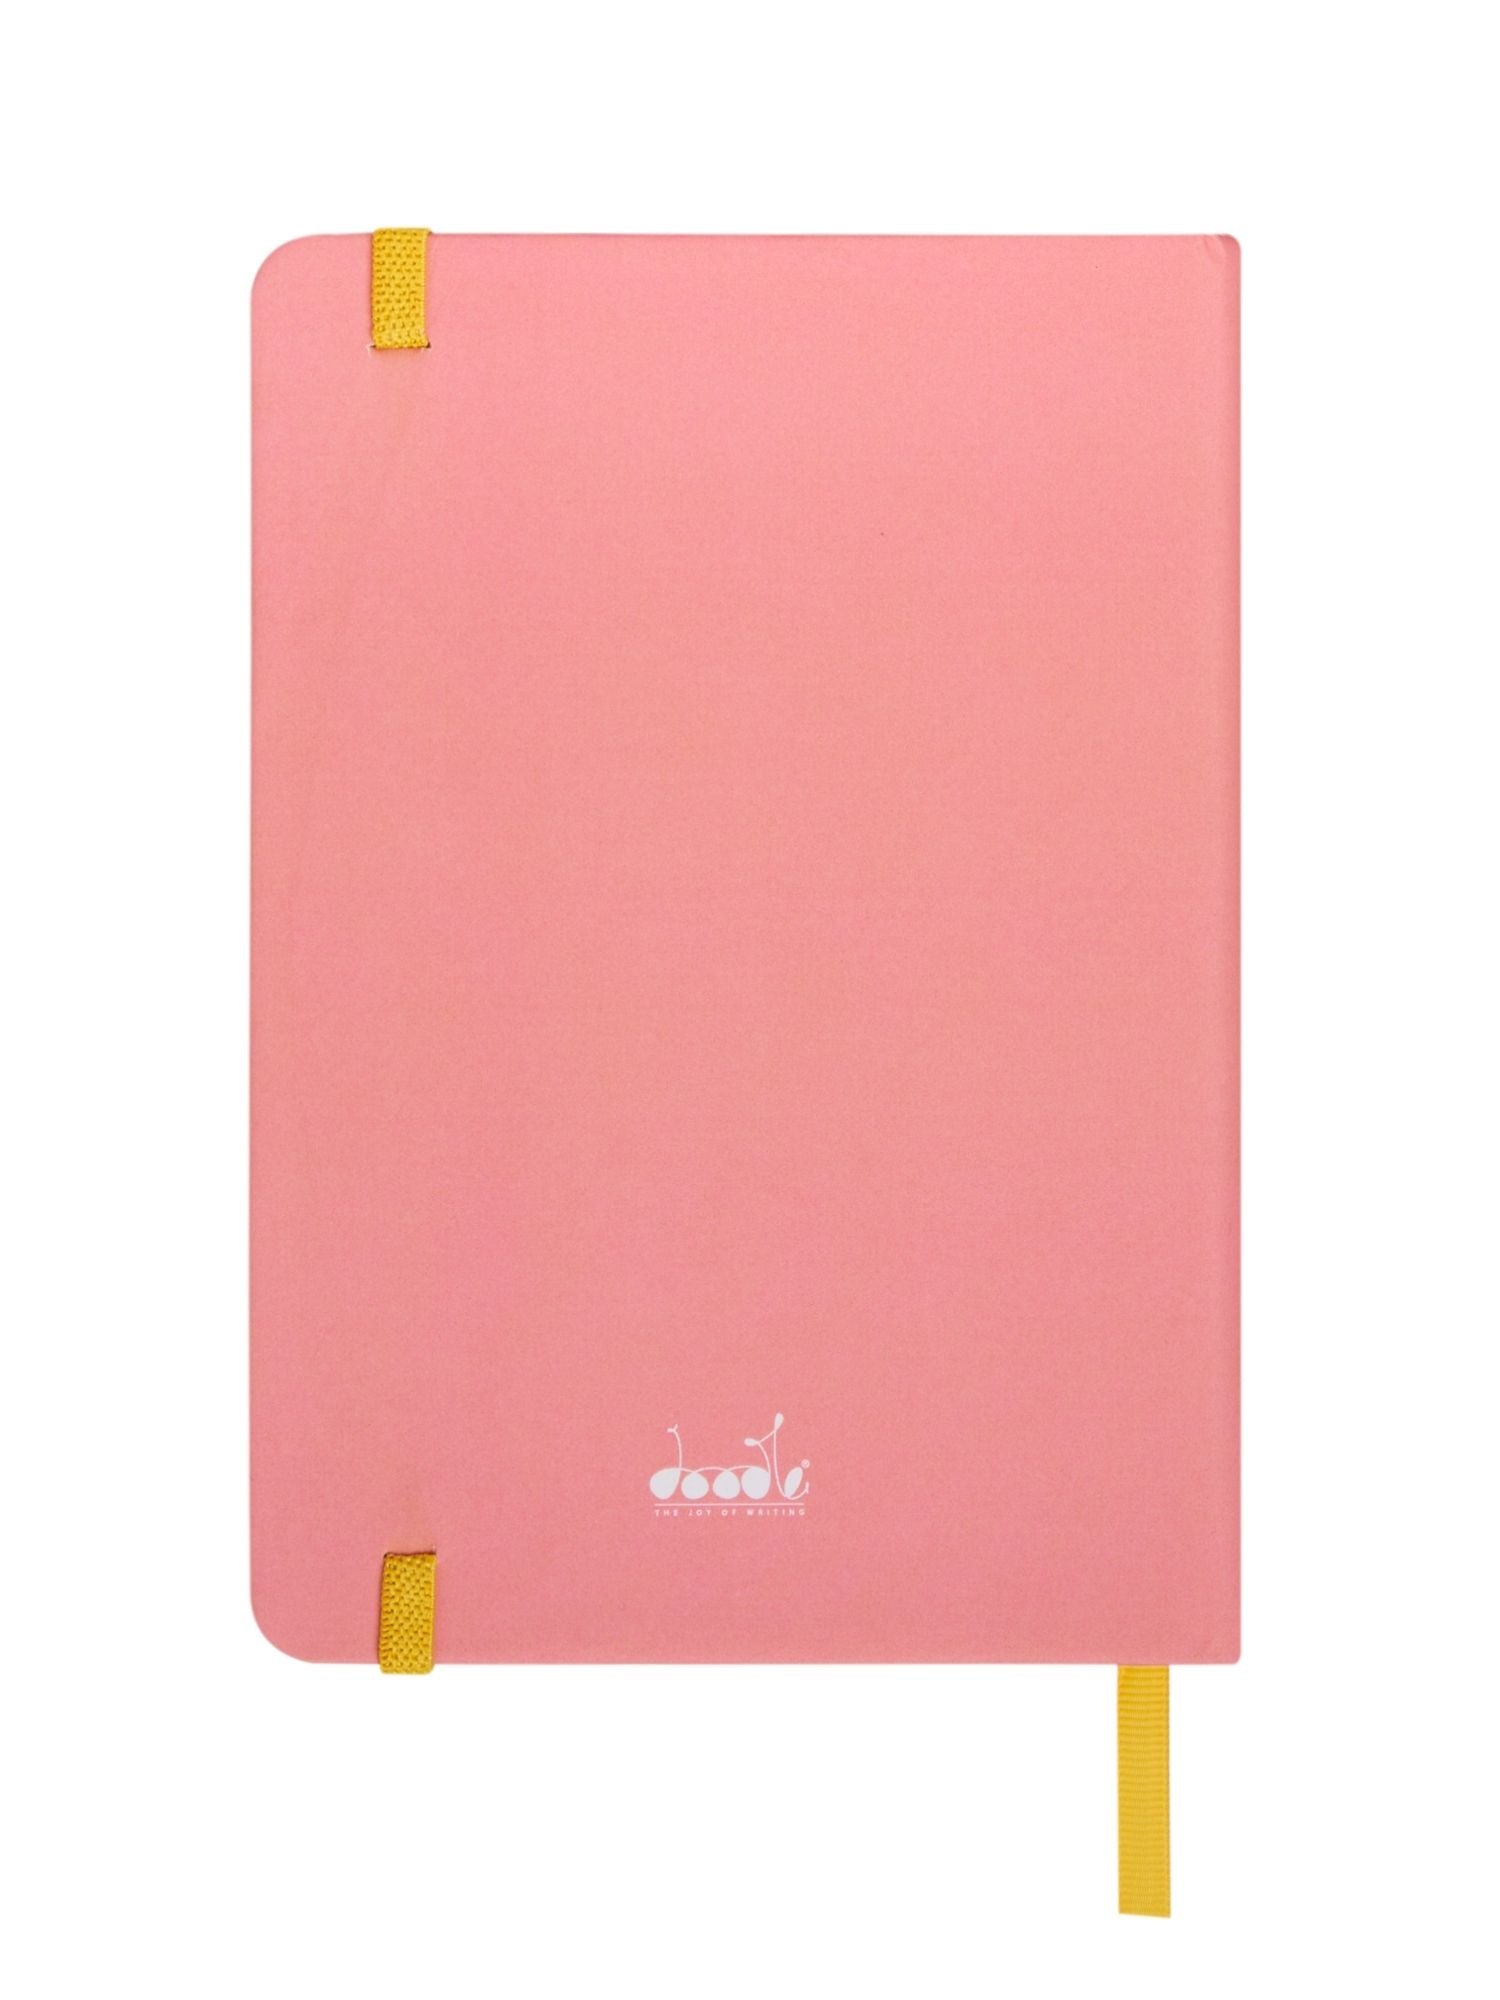 DOODLE Expressions Hardbound B6 Diary Notebook - BREAK FREE